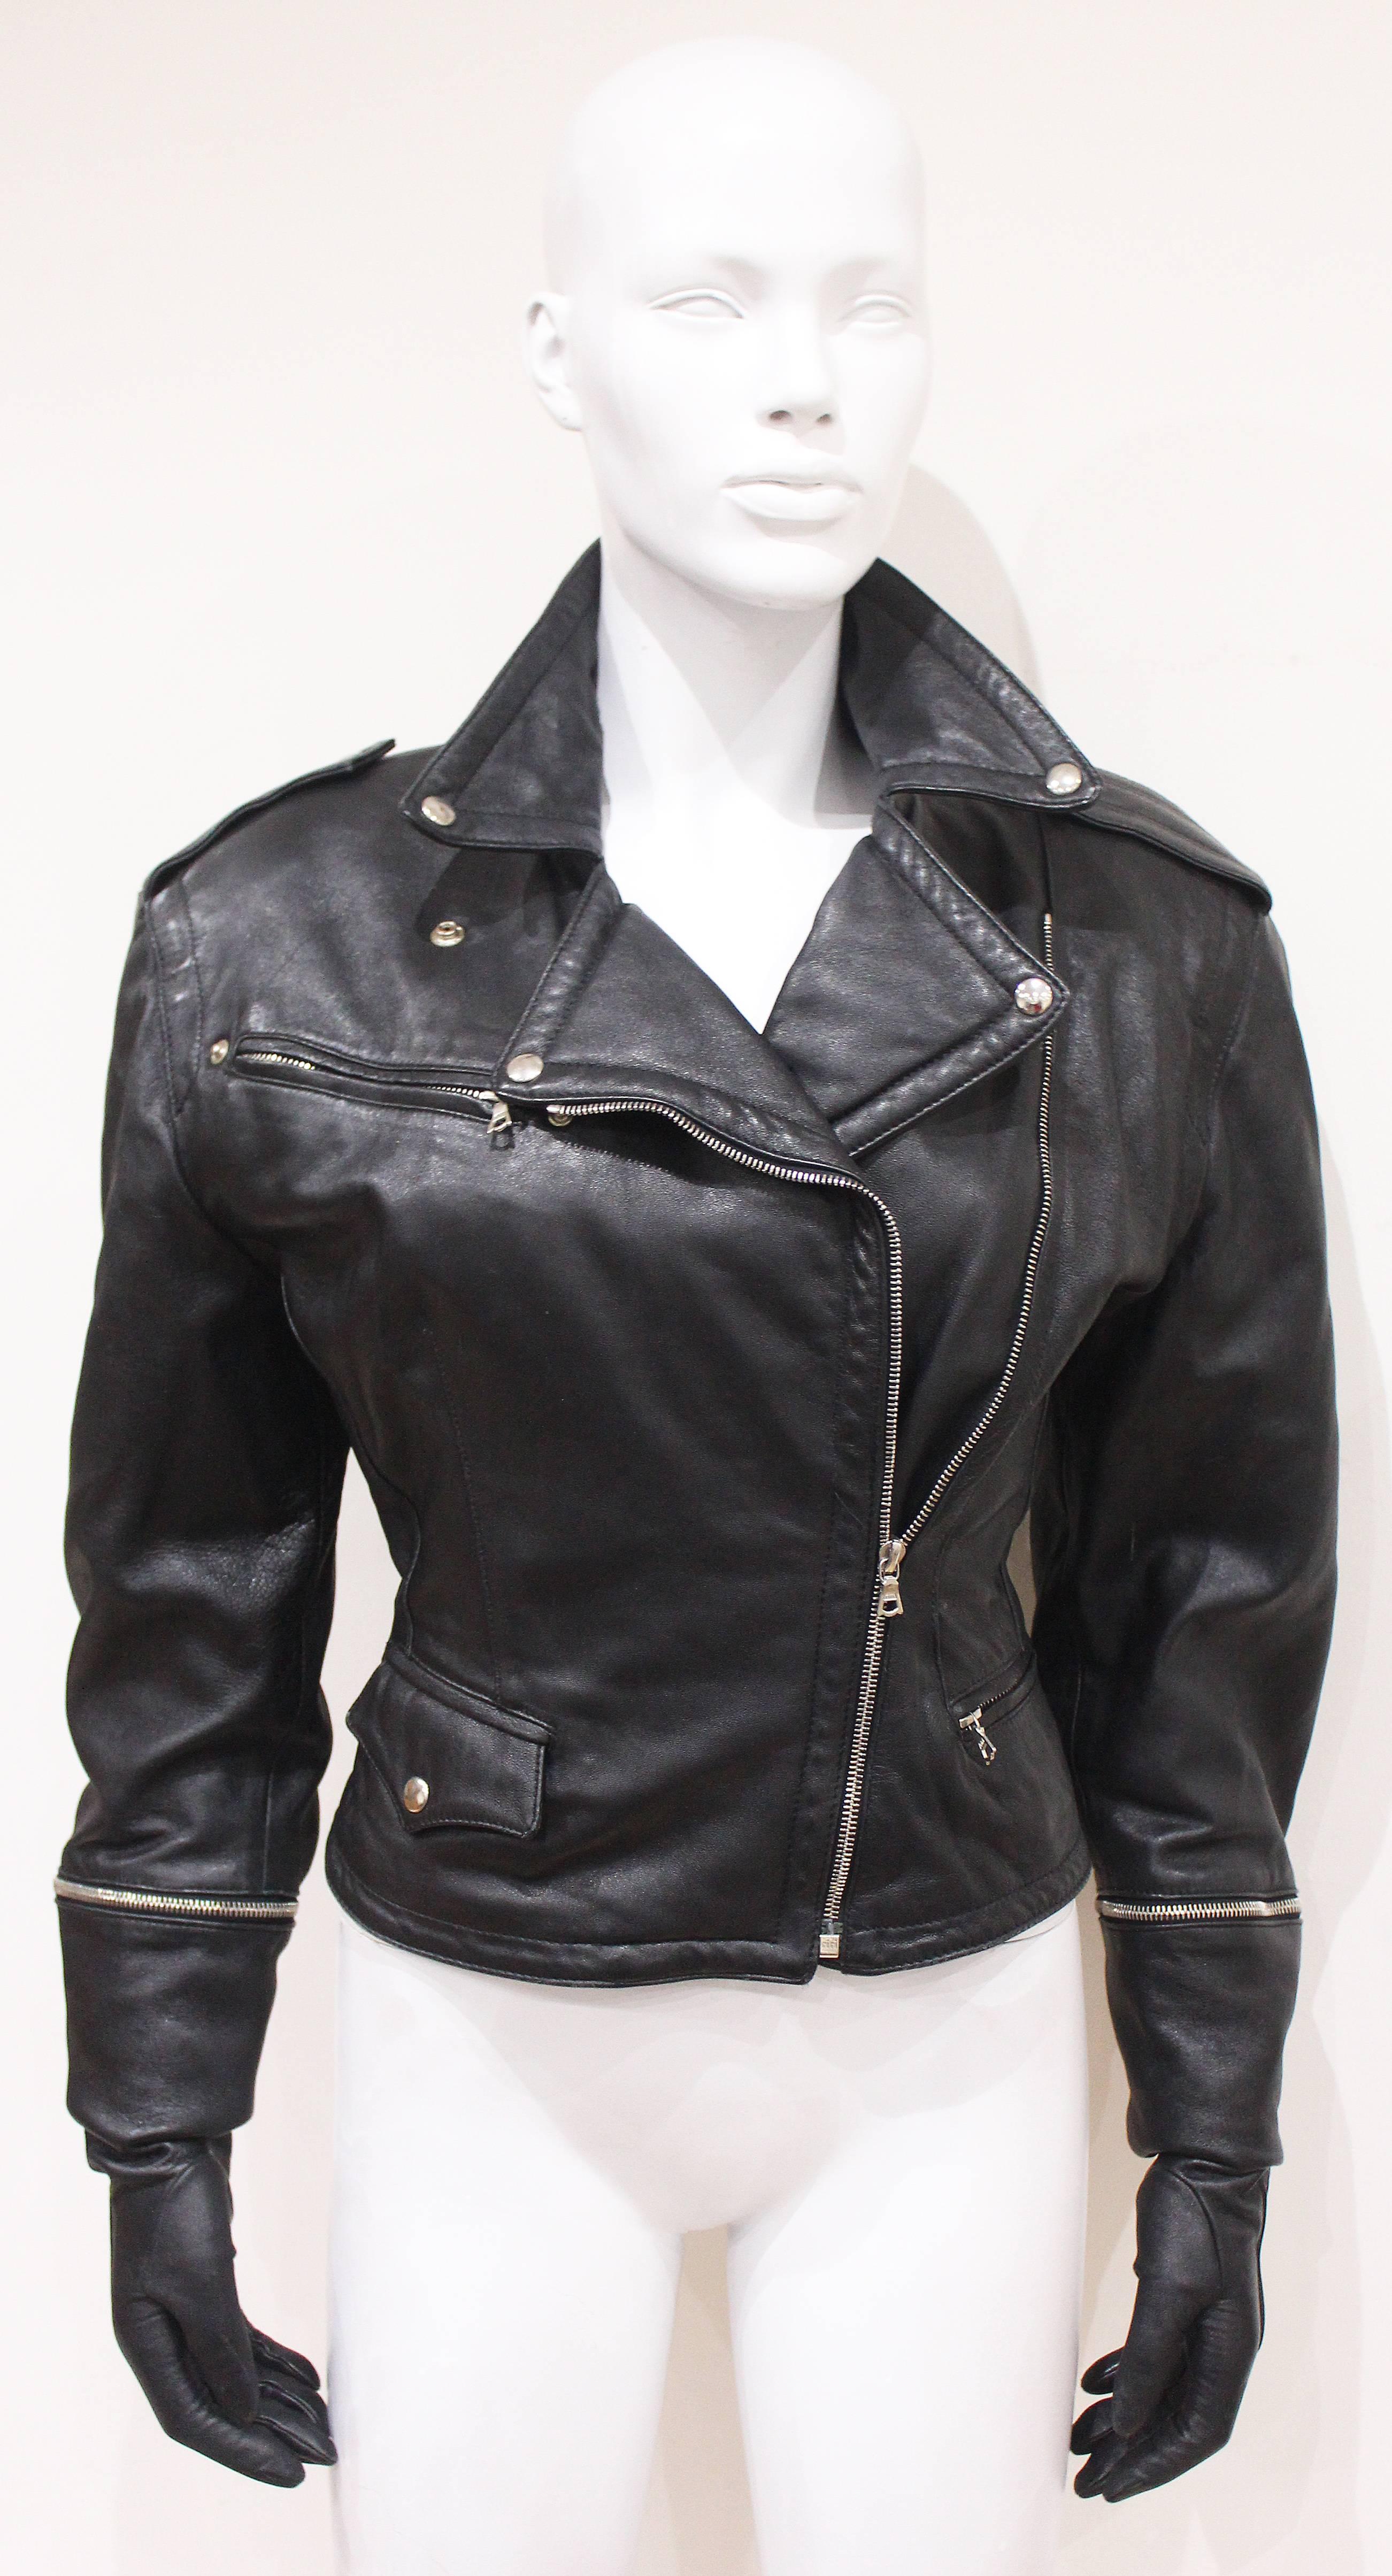 An exceptional and truly one of a kind motorcycle jacket by Josyln Clarke from the 1980s. The jacket is in a classic motorcycle style in black leather but extremely high fashion with the detachable leather gloves. The jacket has metal silver zippers